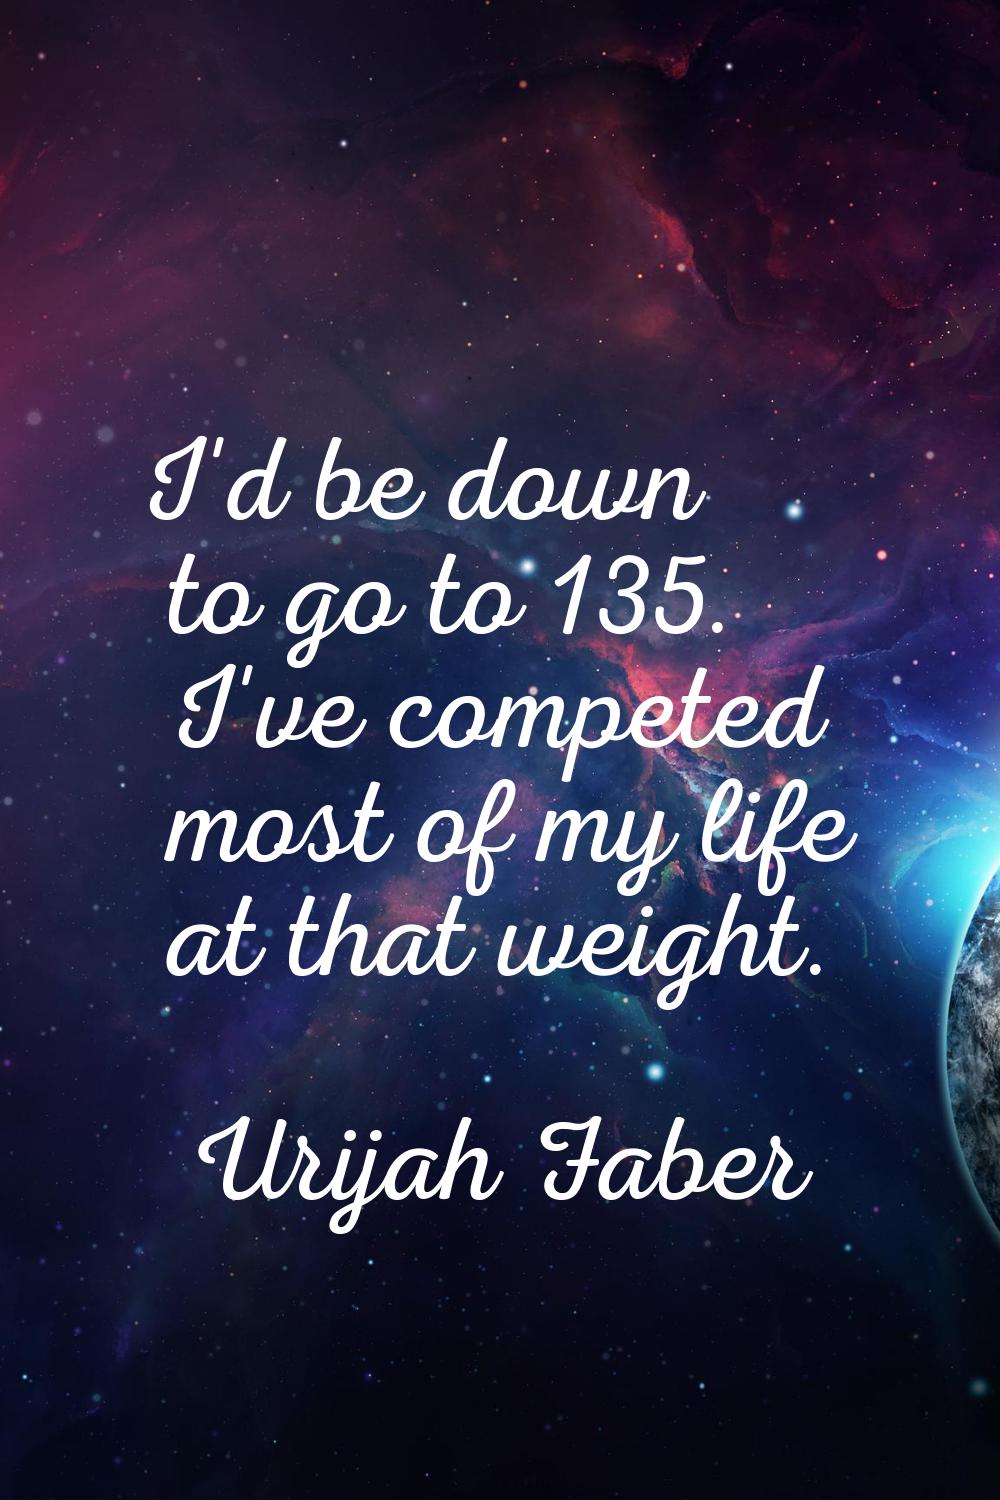 I'd be down to go to 135. I've competed most of my life at that weight.